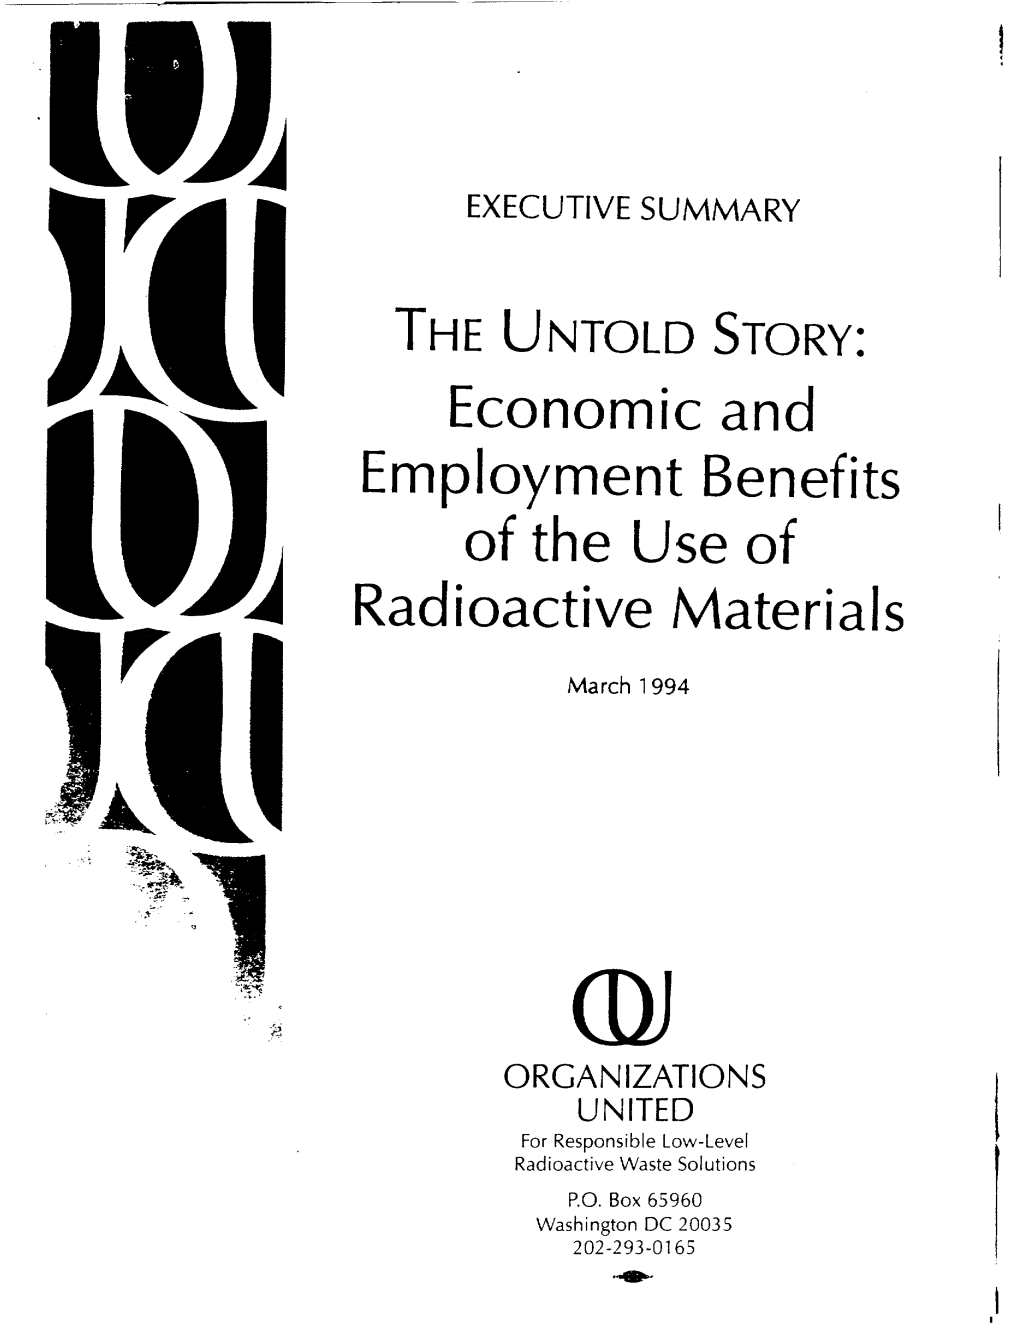 Economic and Employment Benefits of the Use of Radioactive Materials